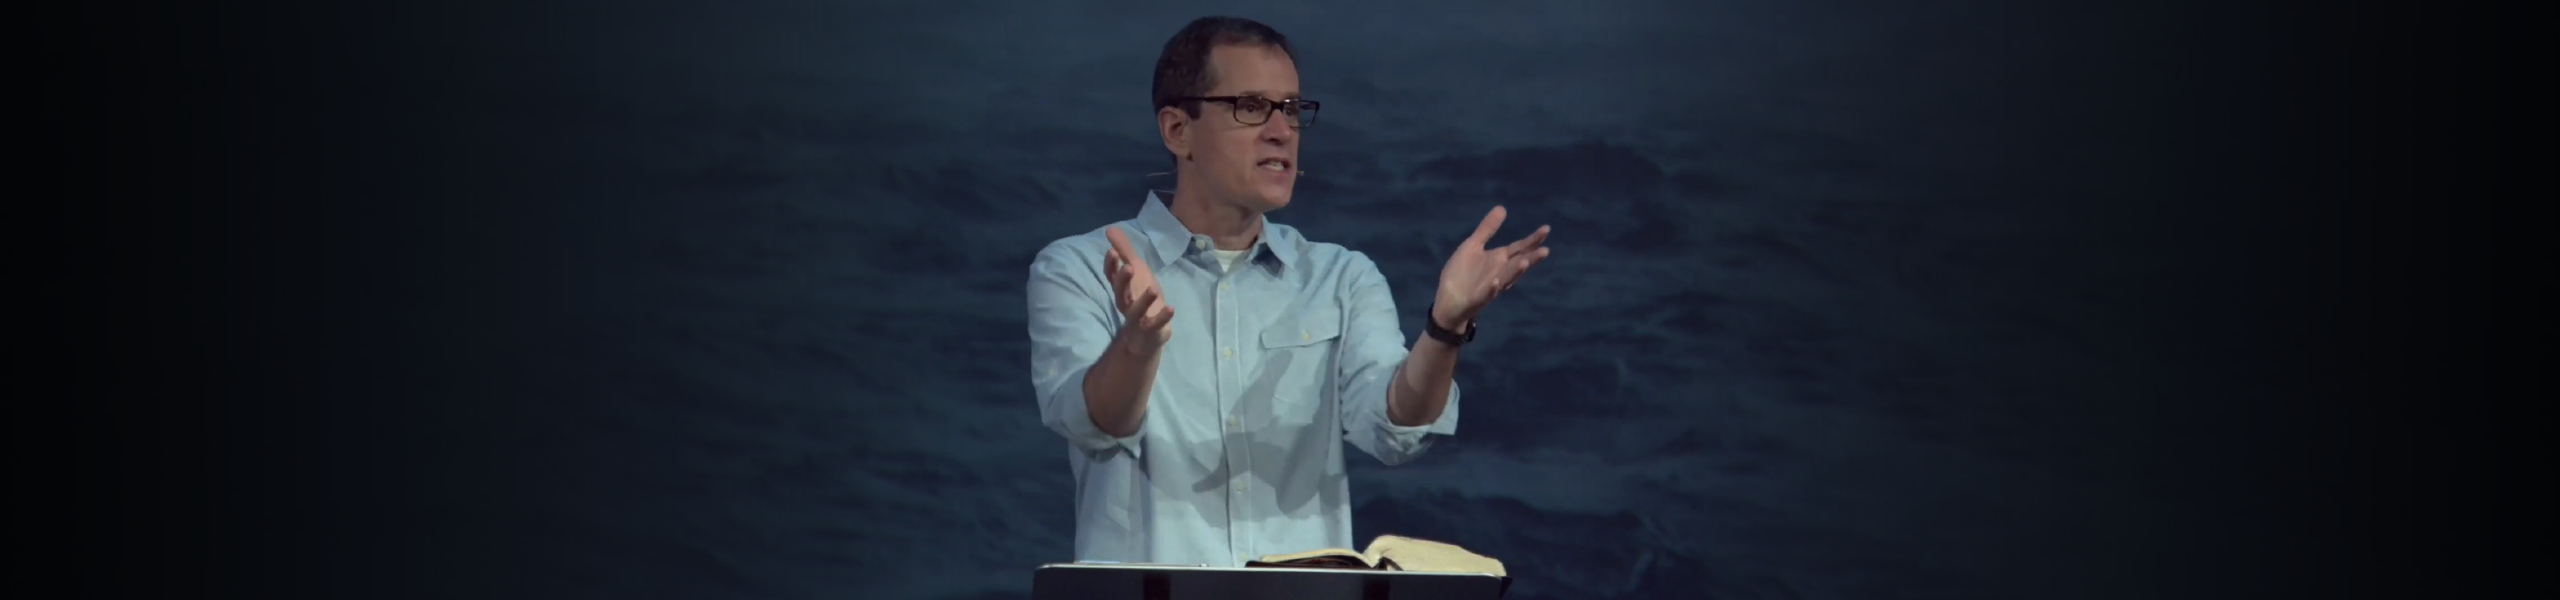 Help For The Troubled Heart | Calvary Church with Ed Taylor